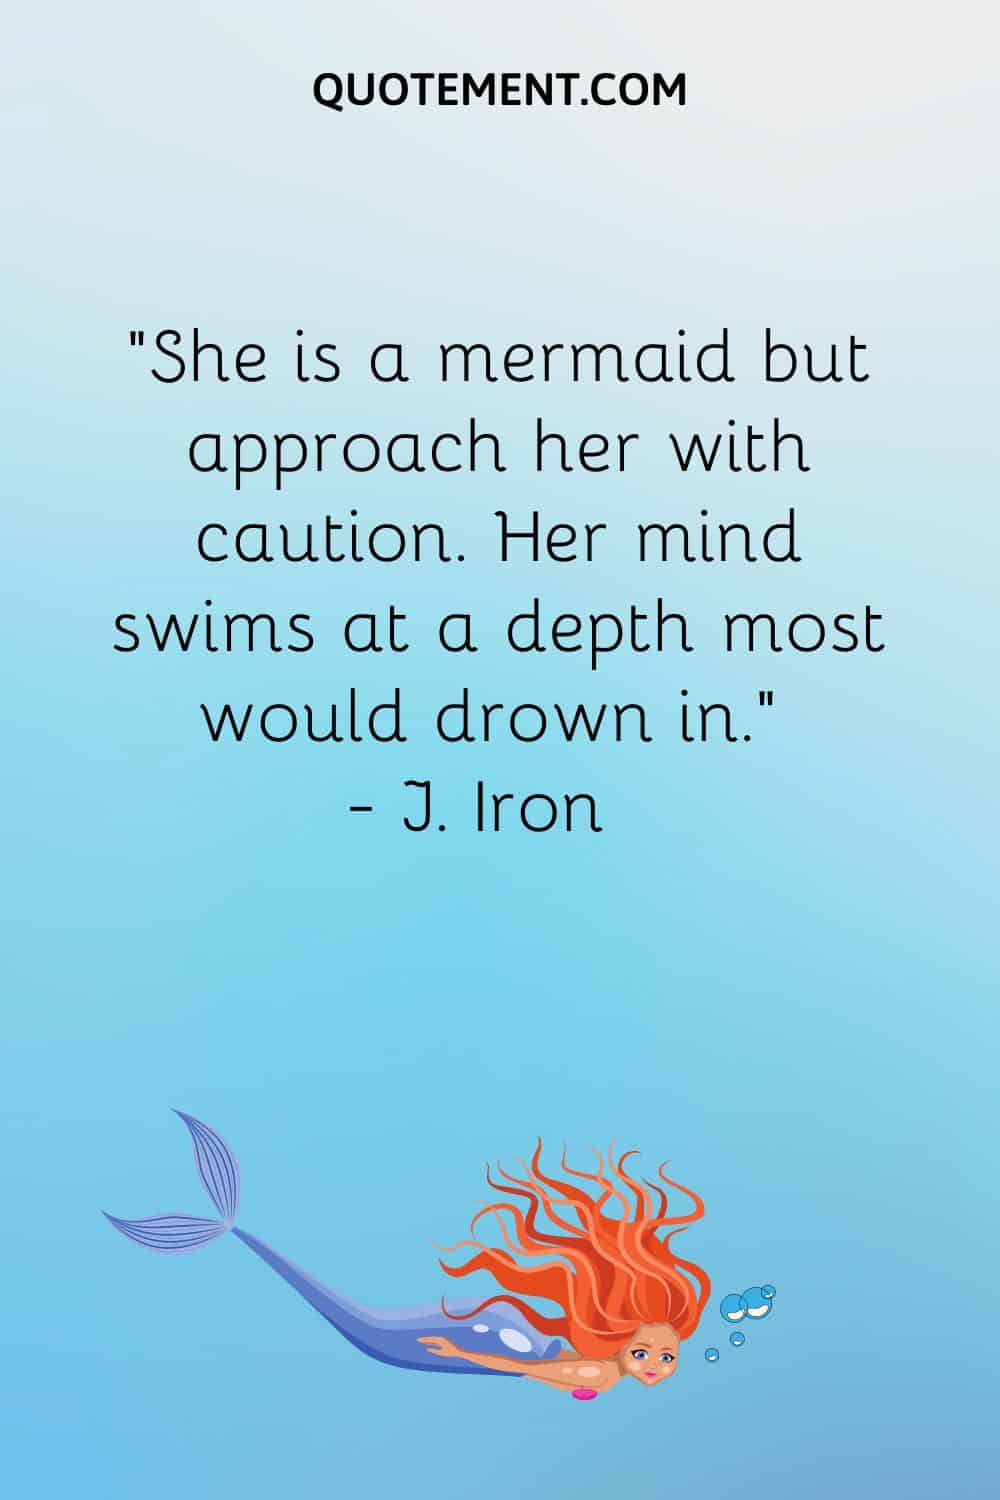 “She is a mermaid but approach her with caution. Her mind swims at a depth most would drown in.” — J. Iron